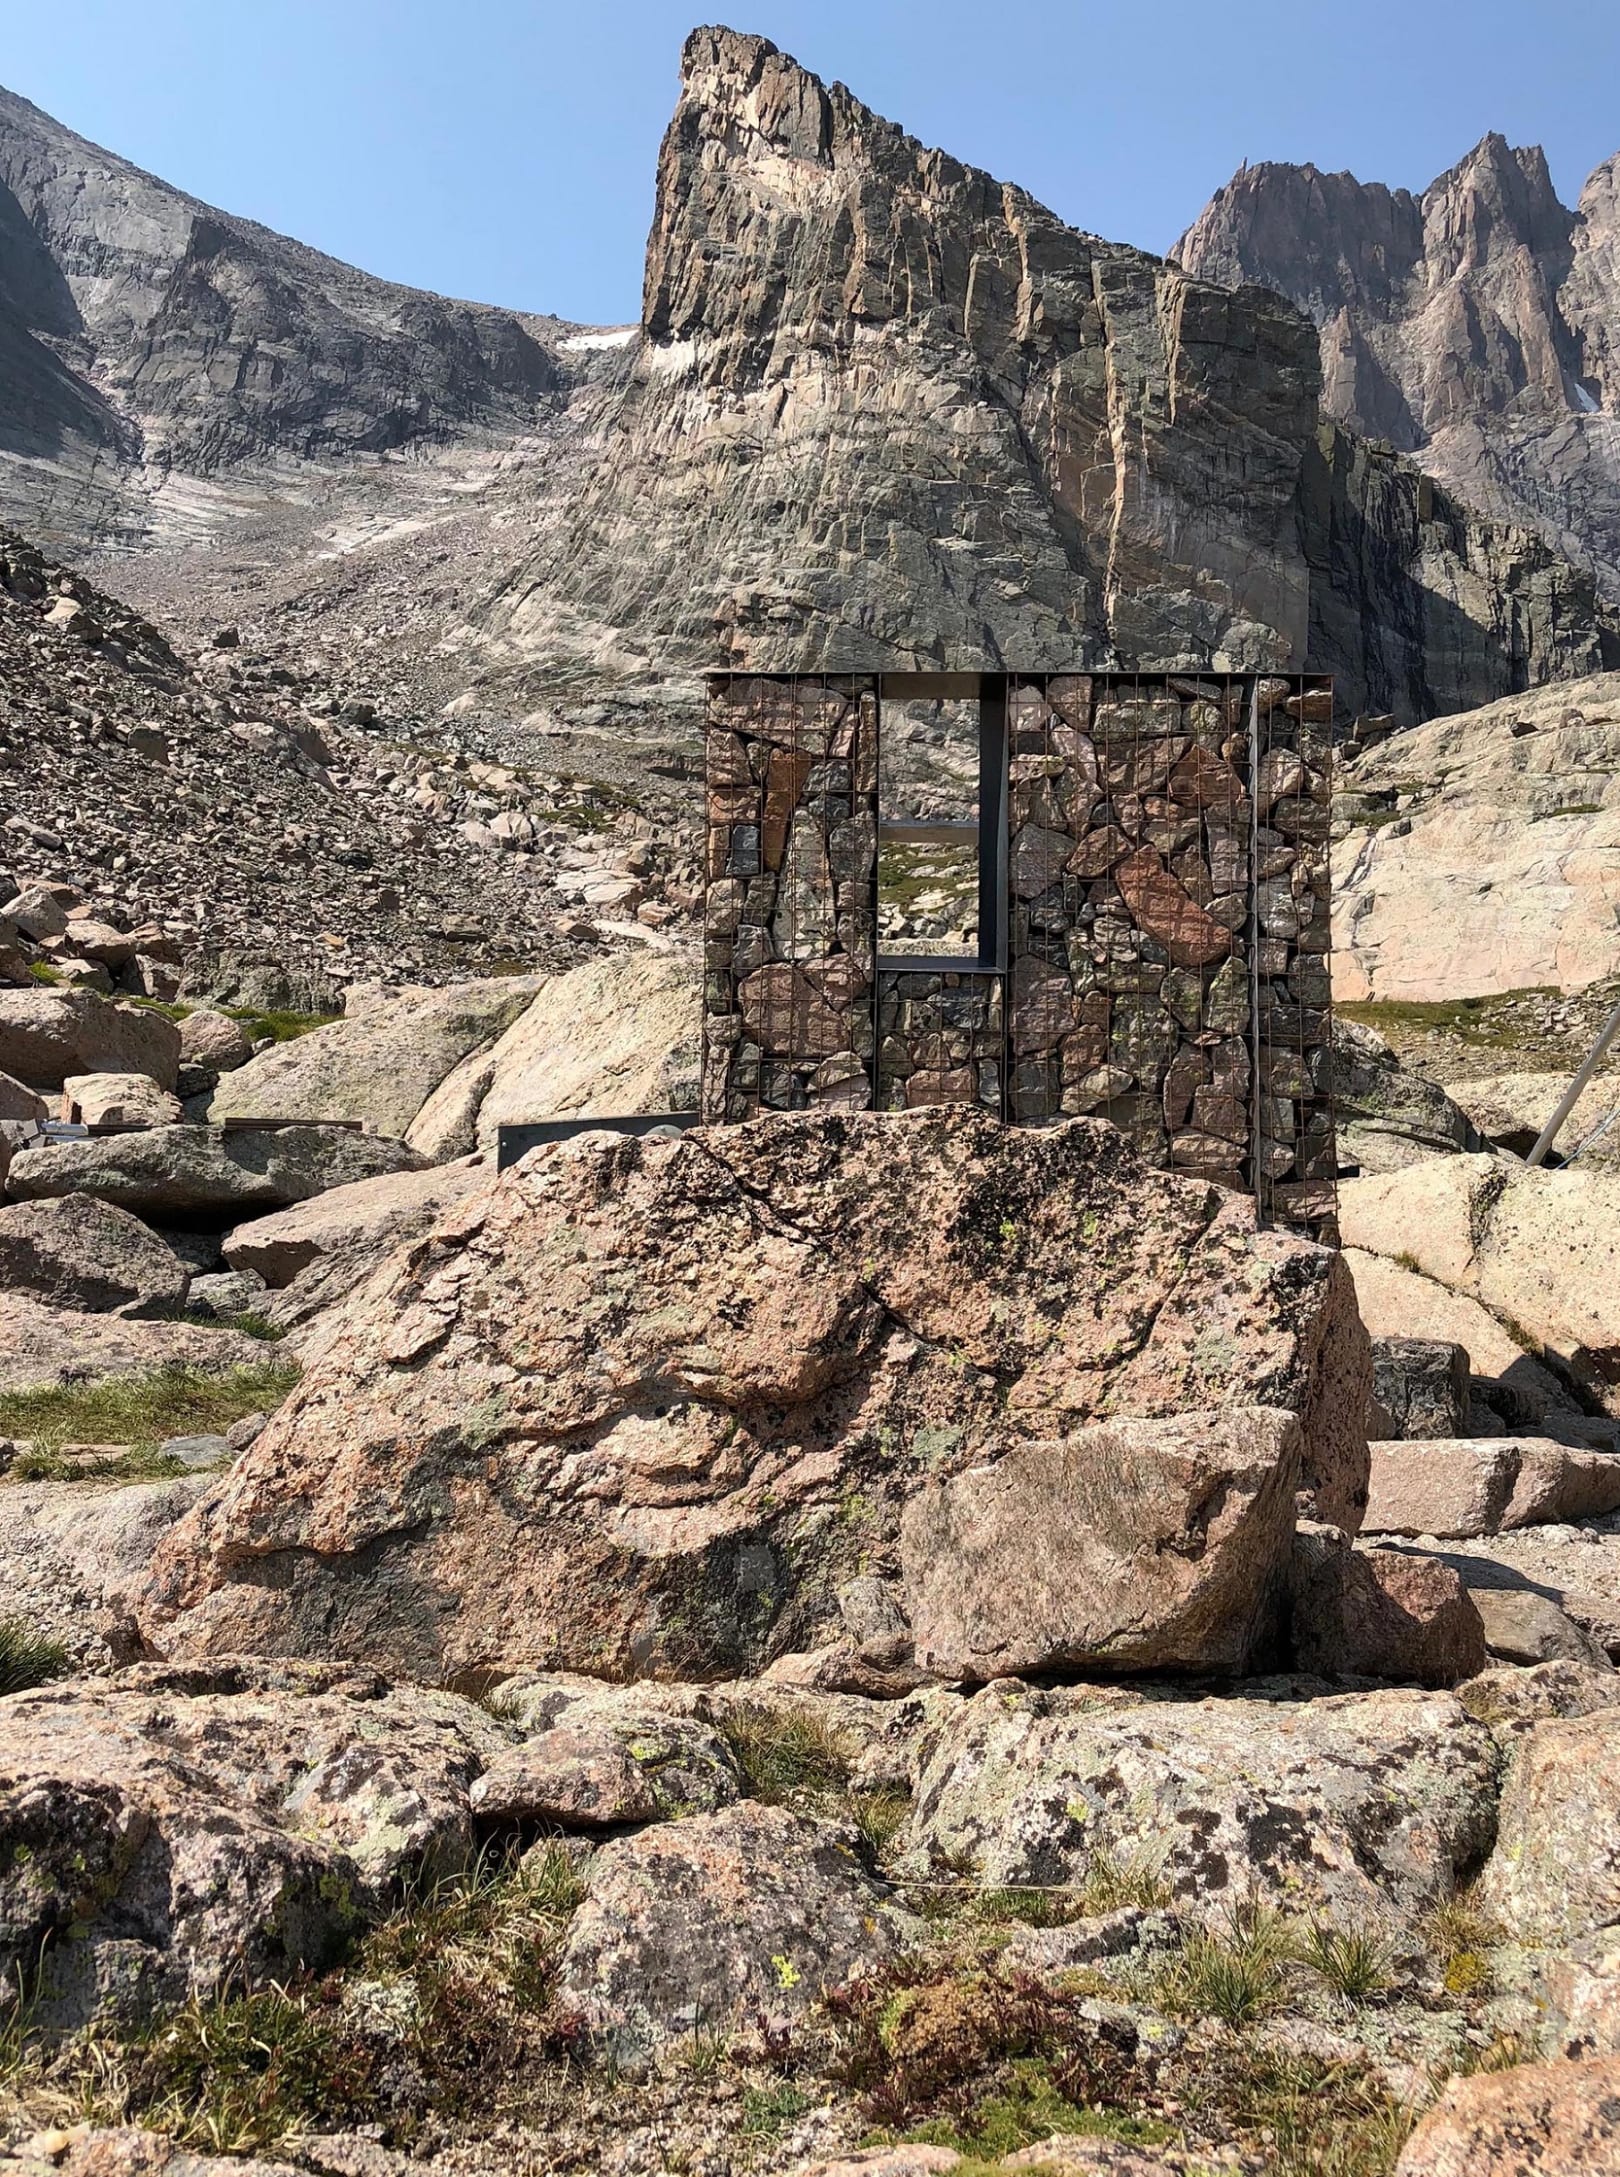 Took me way too long to spot the bathrooms at Rocky Mountain National Park...